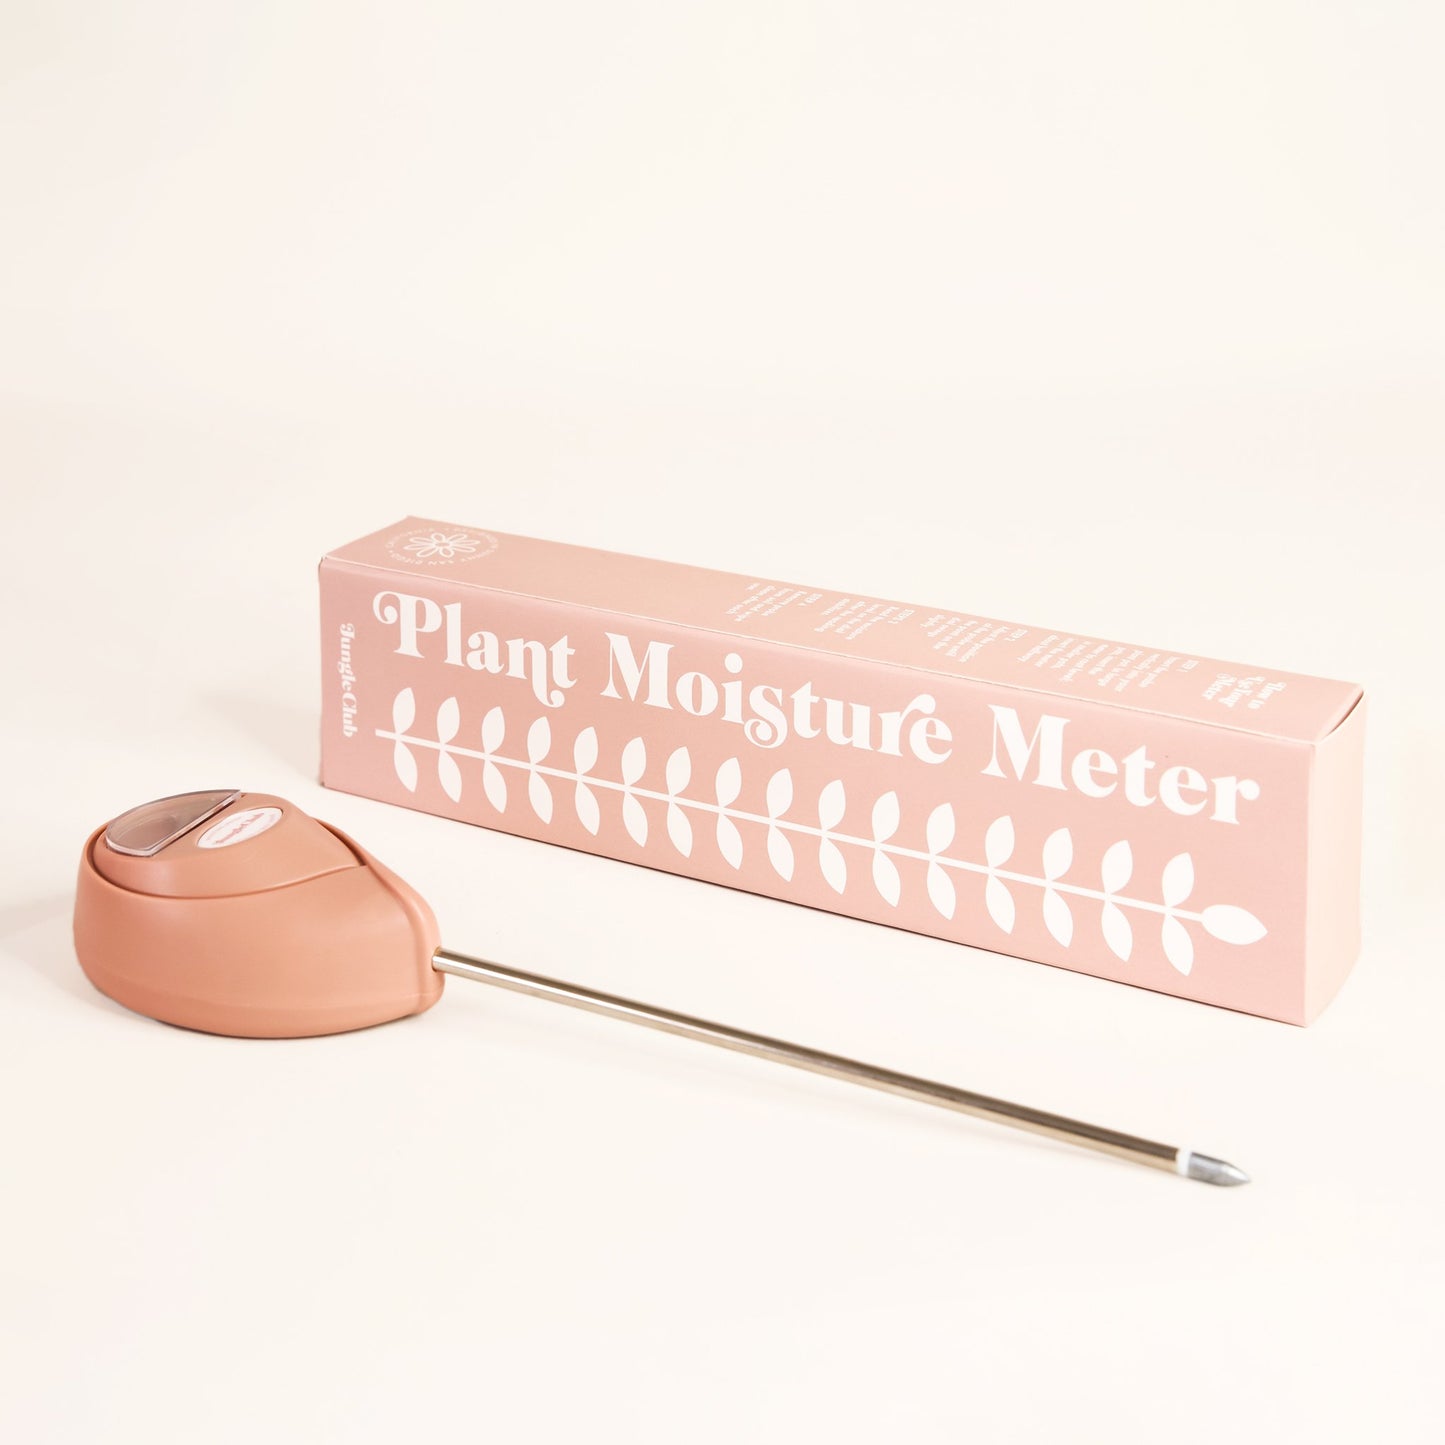 Soft pink moisture meter laying besides packaging that reads 'plant moisture meter' along the side of white leafy design. The moisture meter has an upside down teardrop shape and metal probe running from base.